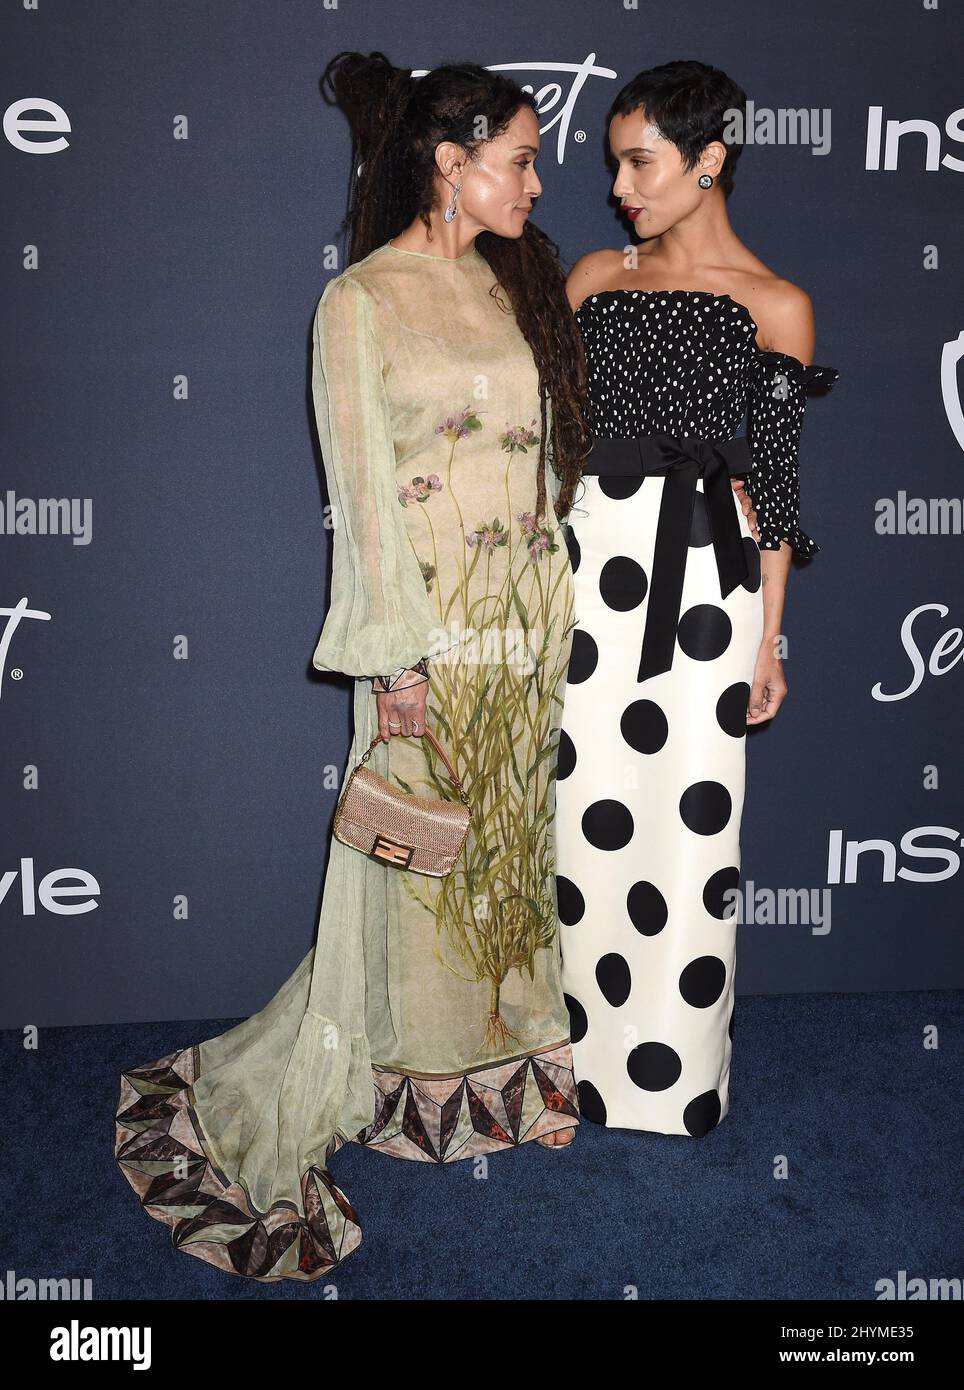 Lisa Bonet and Zoe Kravitz at the Instyle and Warner Bros Golden Globes ...